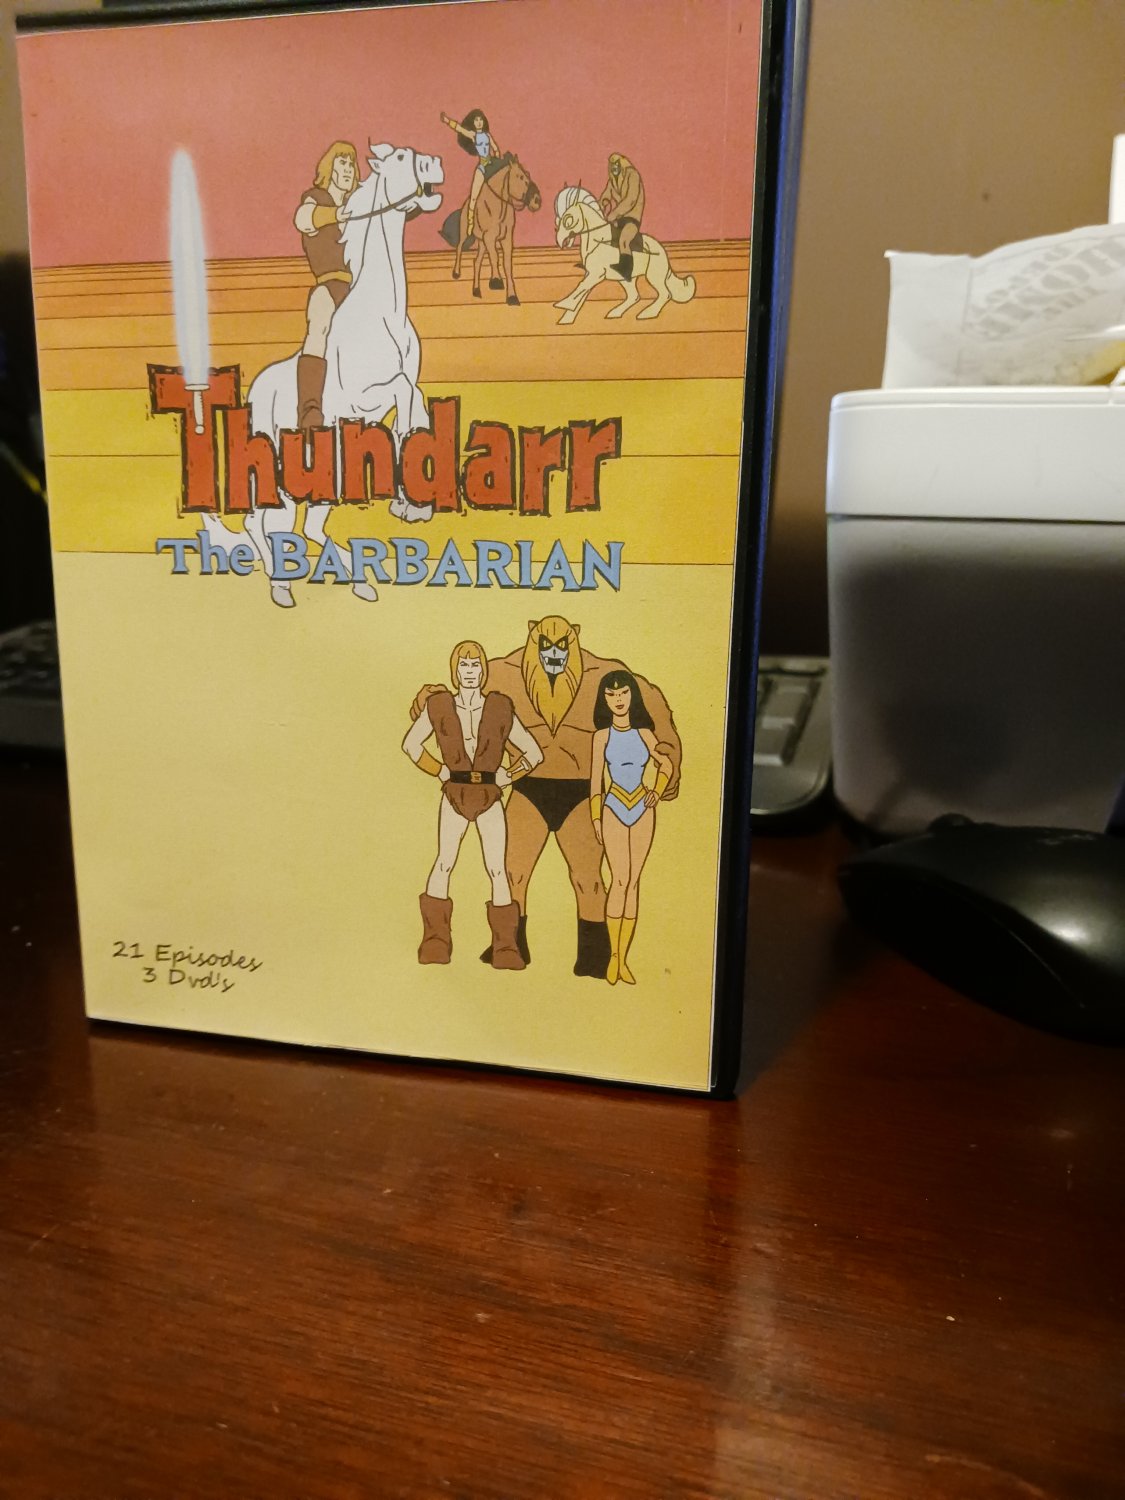 Thundarr the Barbarian Complete Series